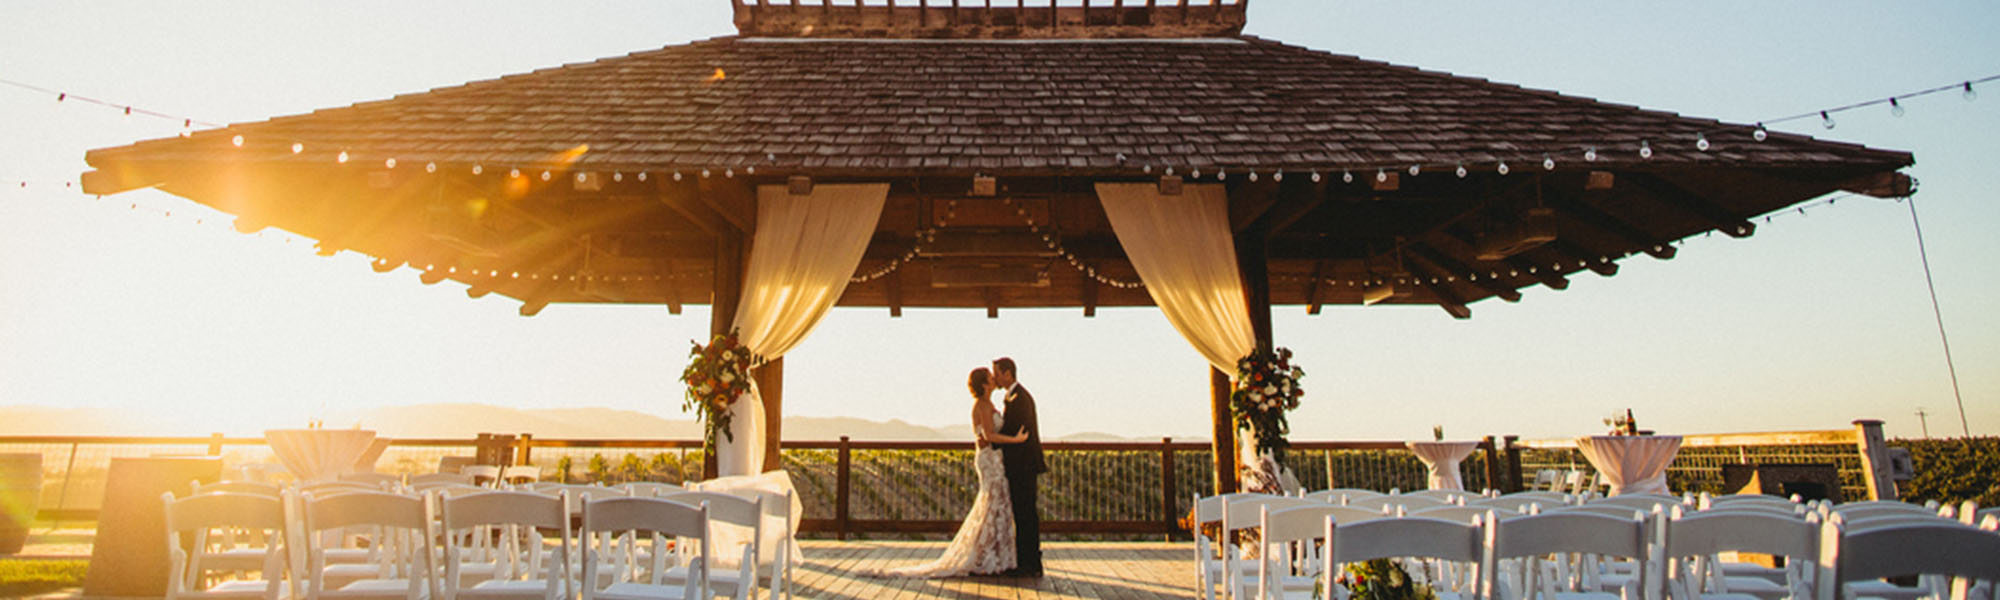 Paso Robles Winery Wedding Venue Options